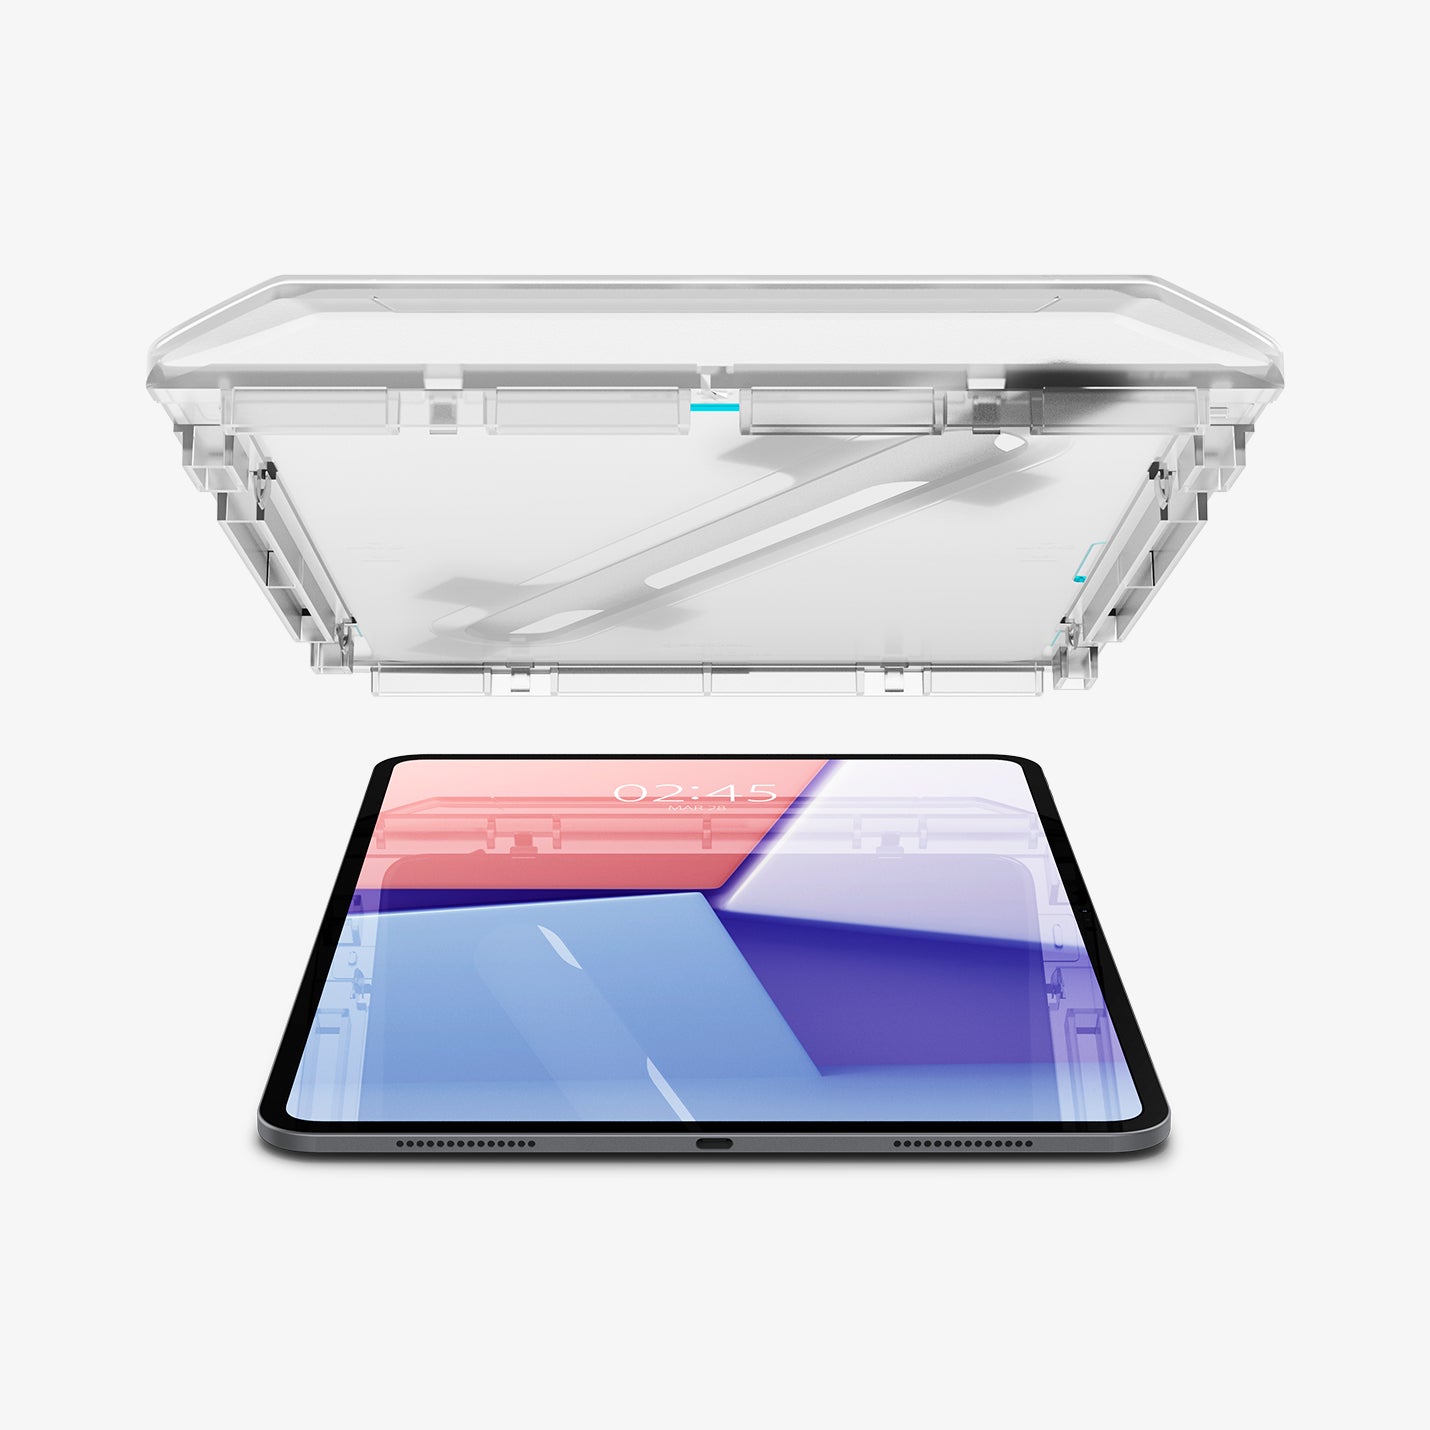 AGL07793 - iPad Pro 12.9-inch GLAS.tR EZ FIT in Clear showing the alignment tray with screen protector hovering above the device in portrait position